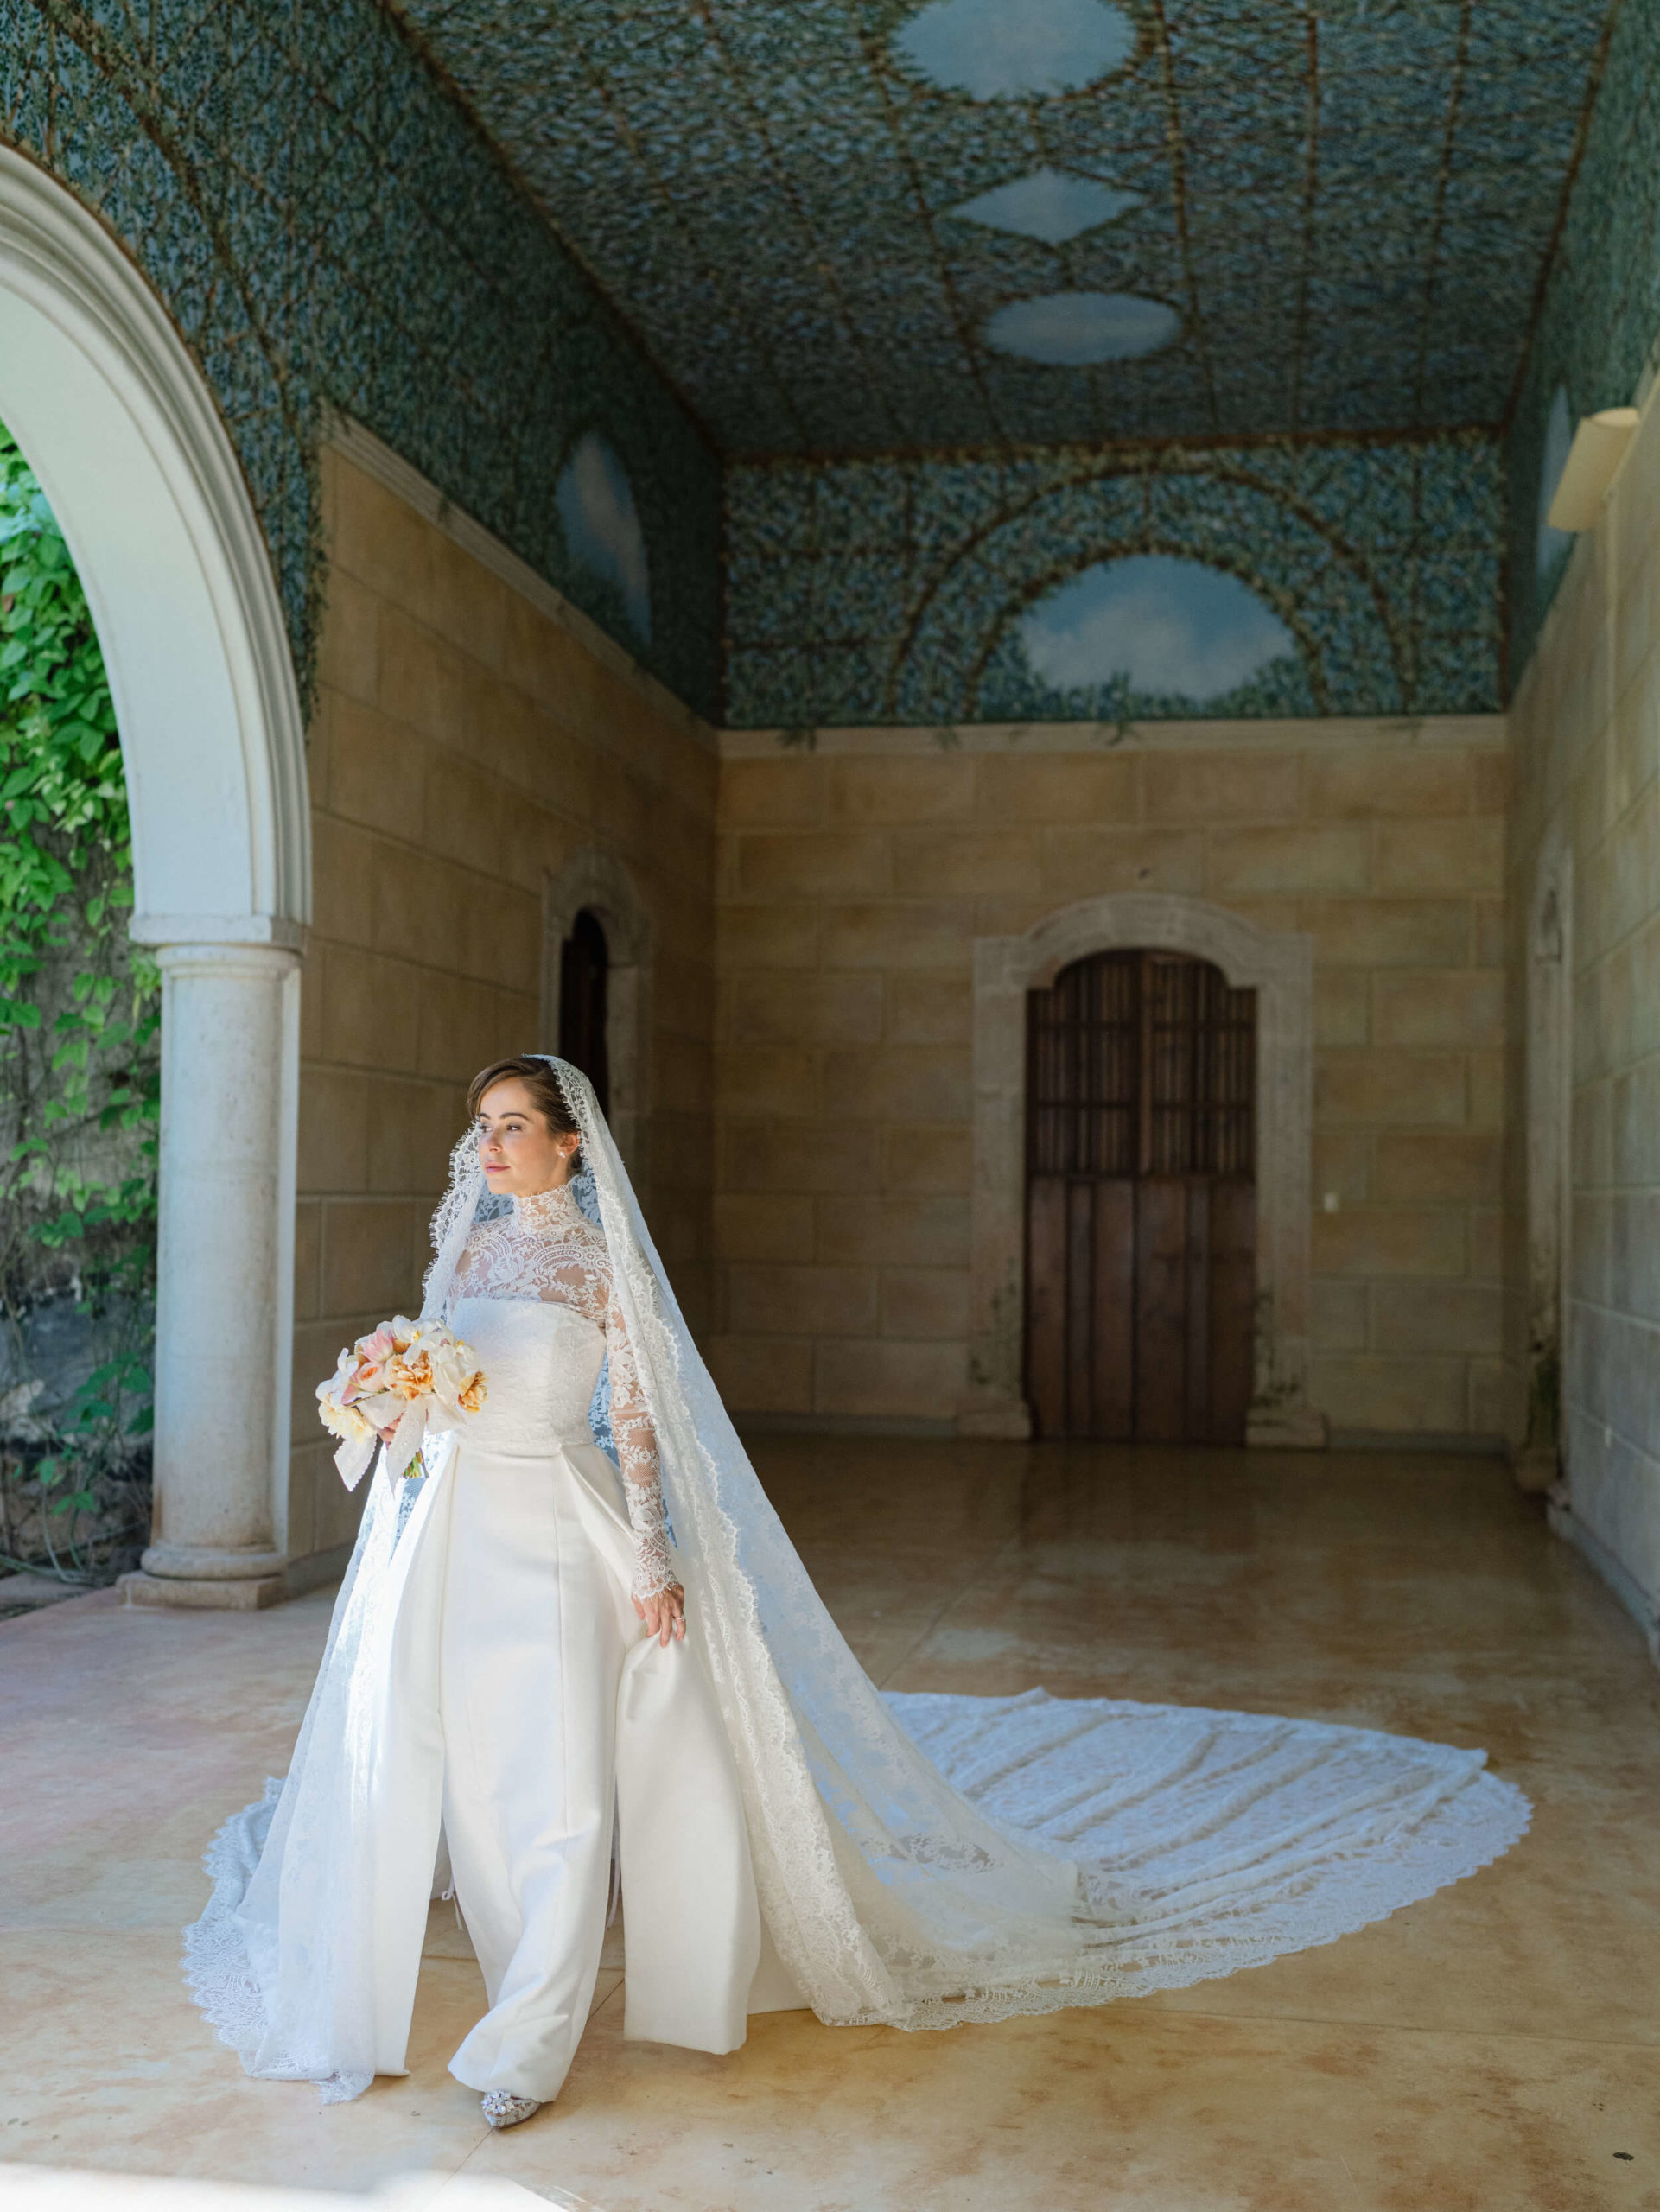 Bride in wedding dress and veil, holding bouquet